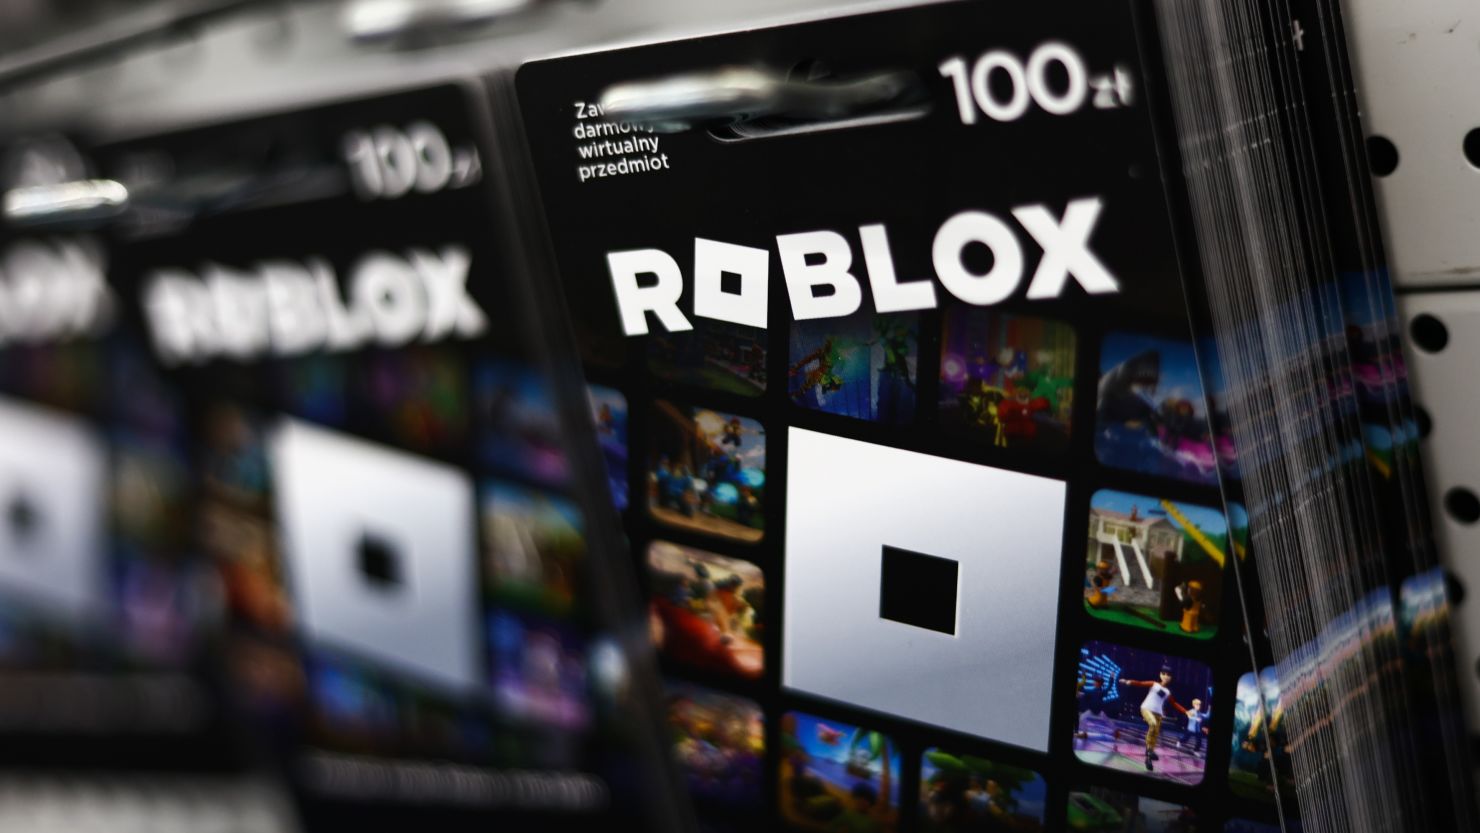 First offsale (non-sponsored) Roblox item to go limited in years